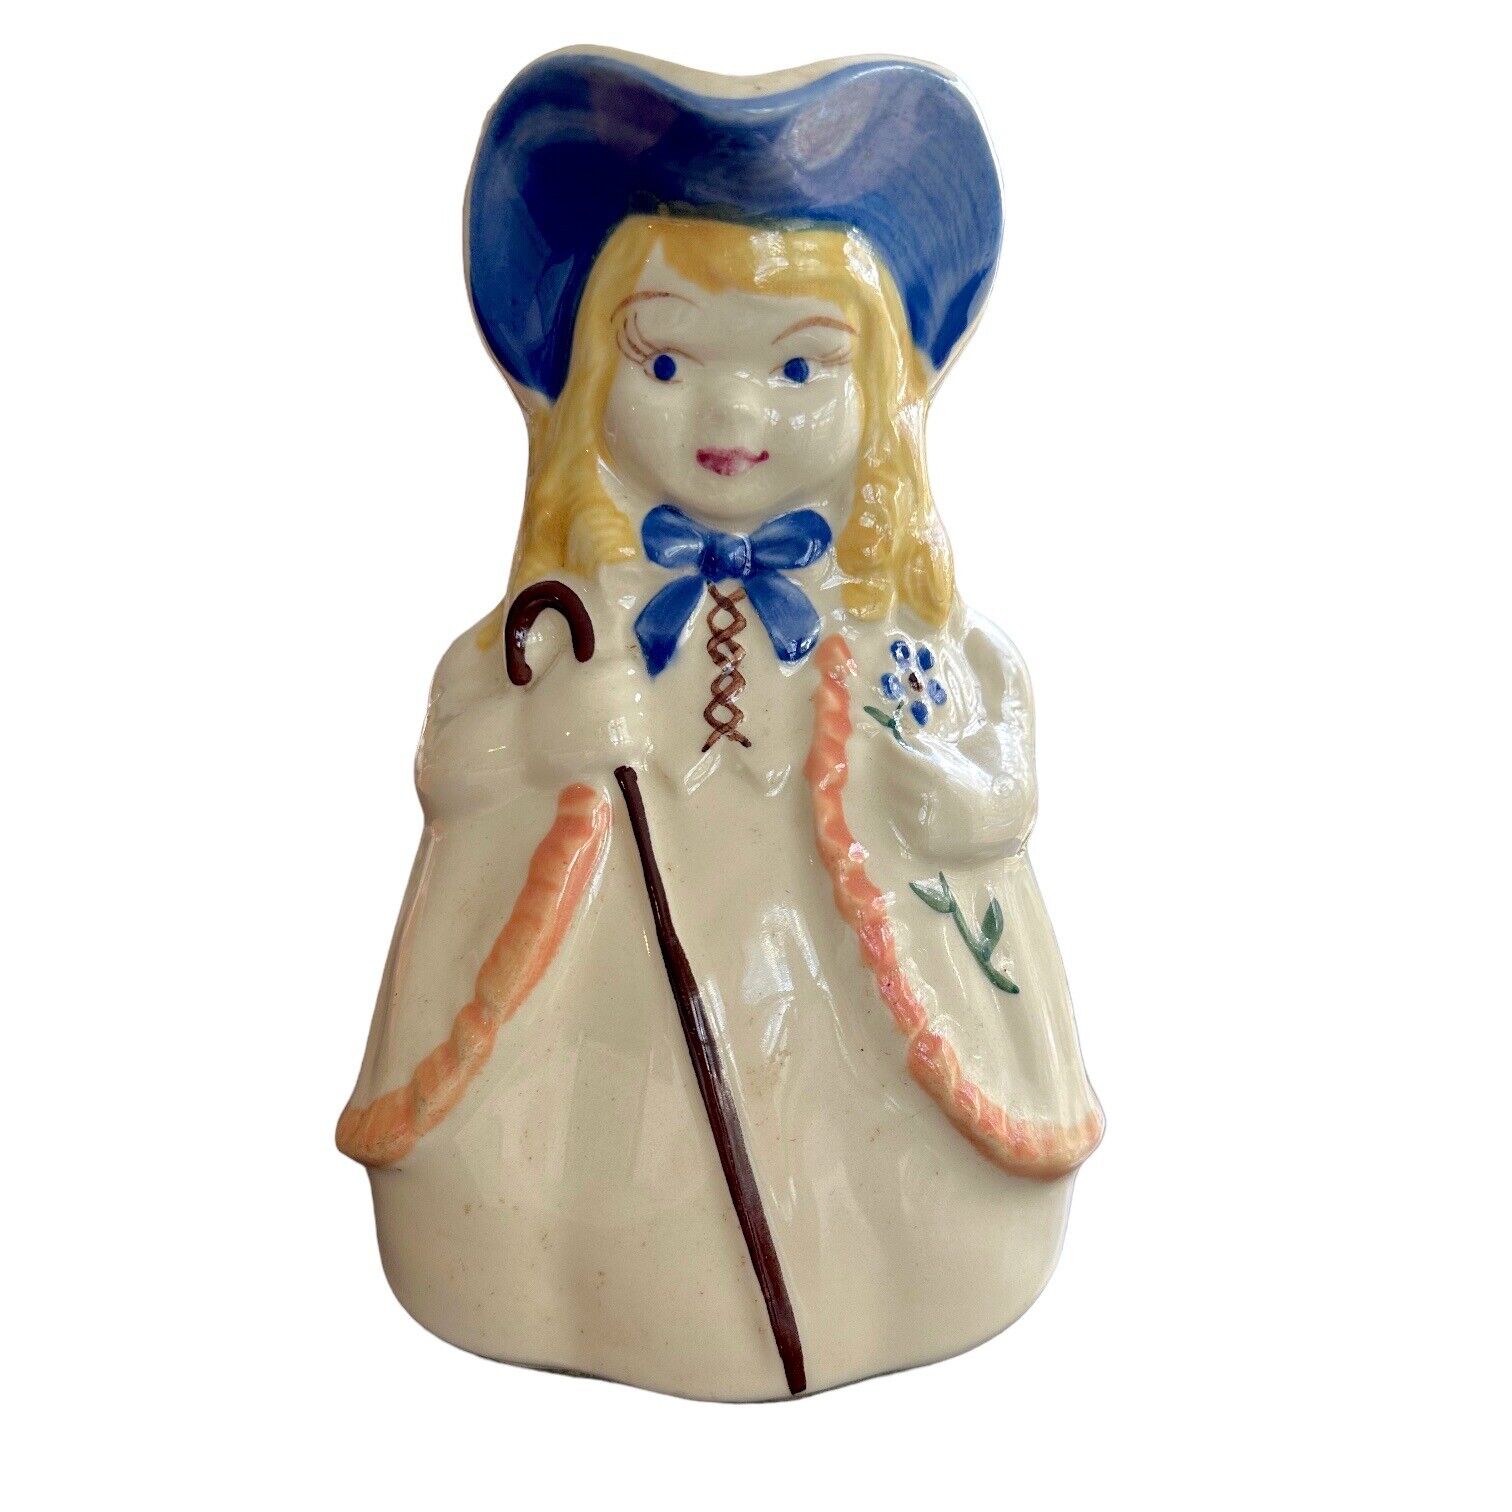 Shawnee Pitcher Pottery Patented Little Bo Peep Made In USA 1940s Vintage Signed